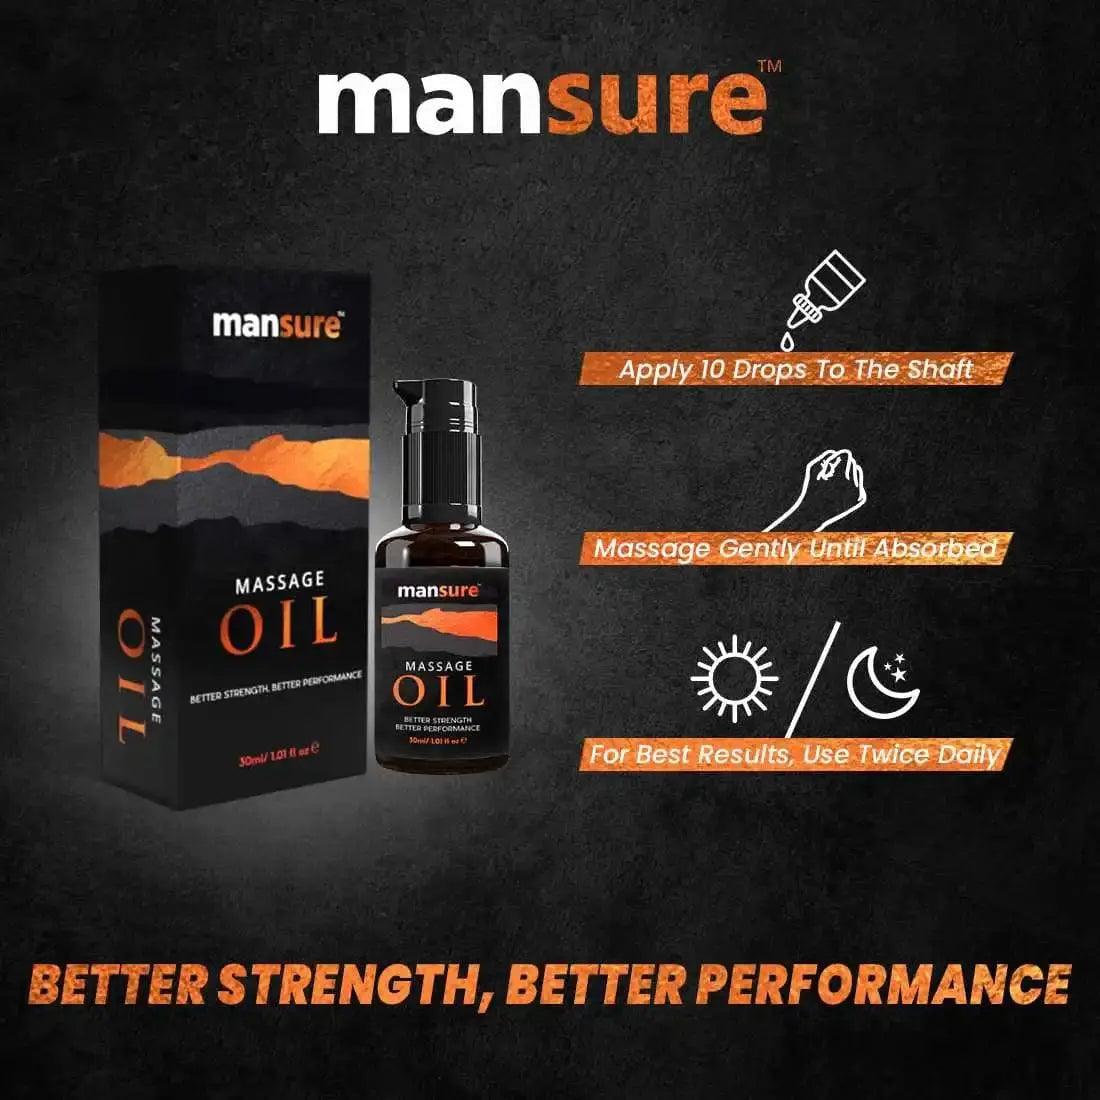 How To Use ManSure Massage Oil For Men's Health